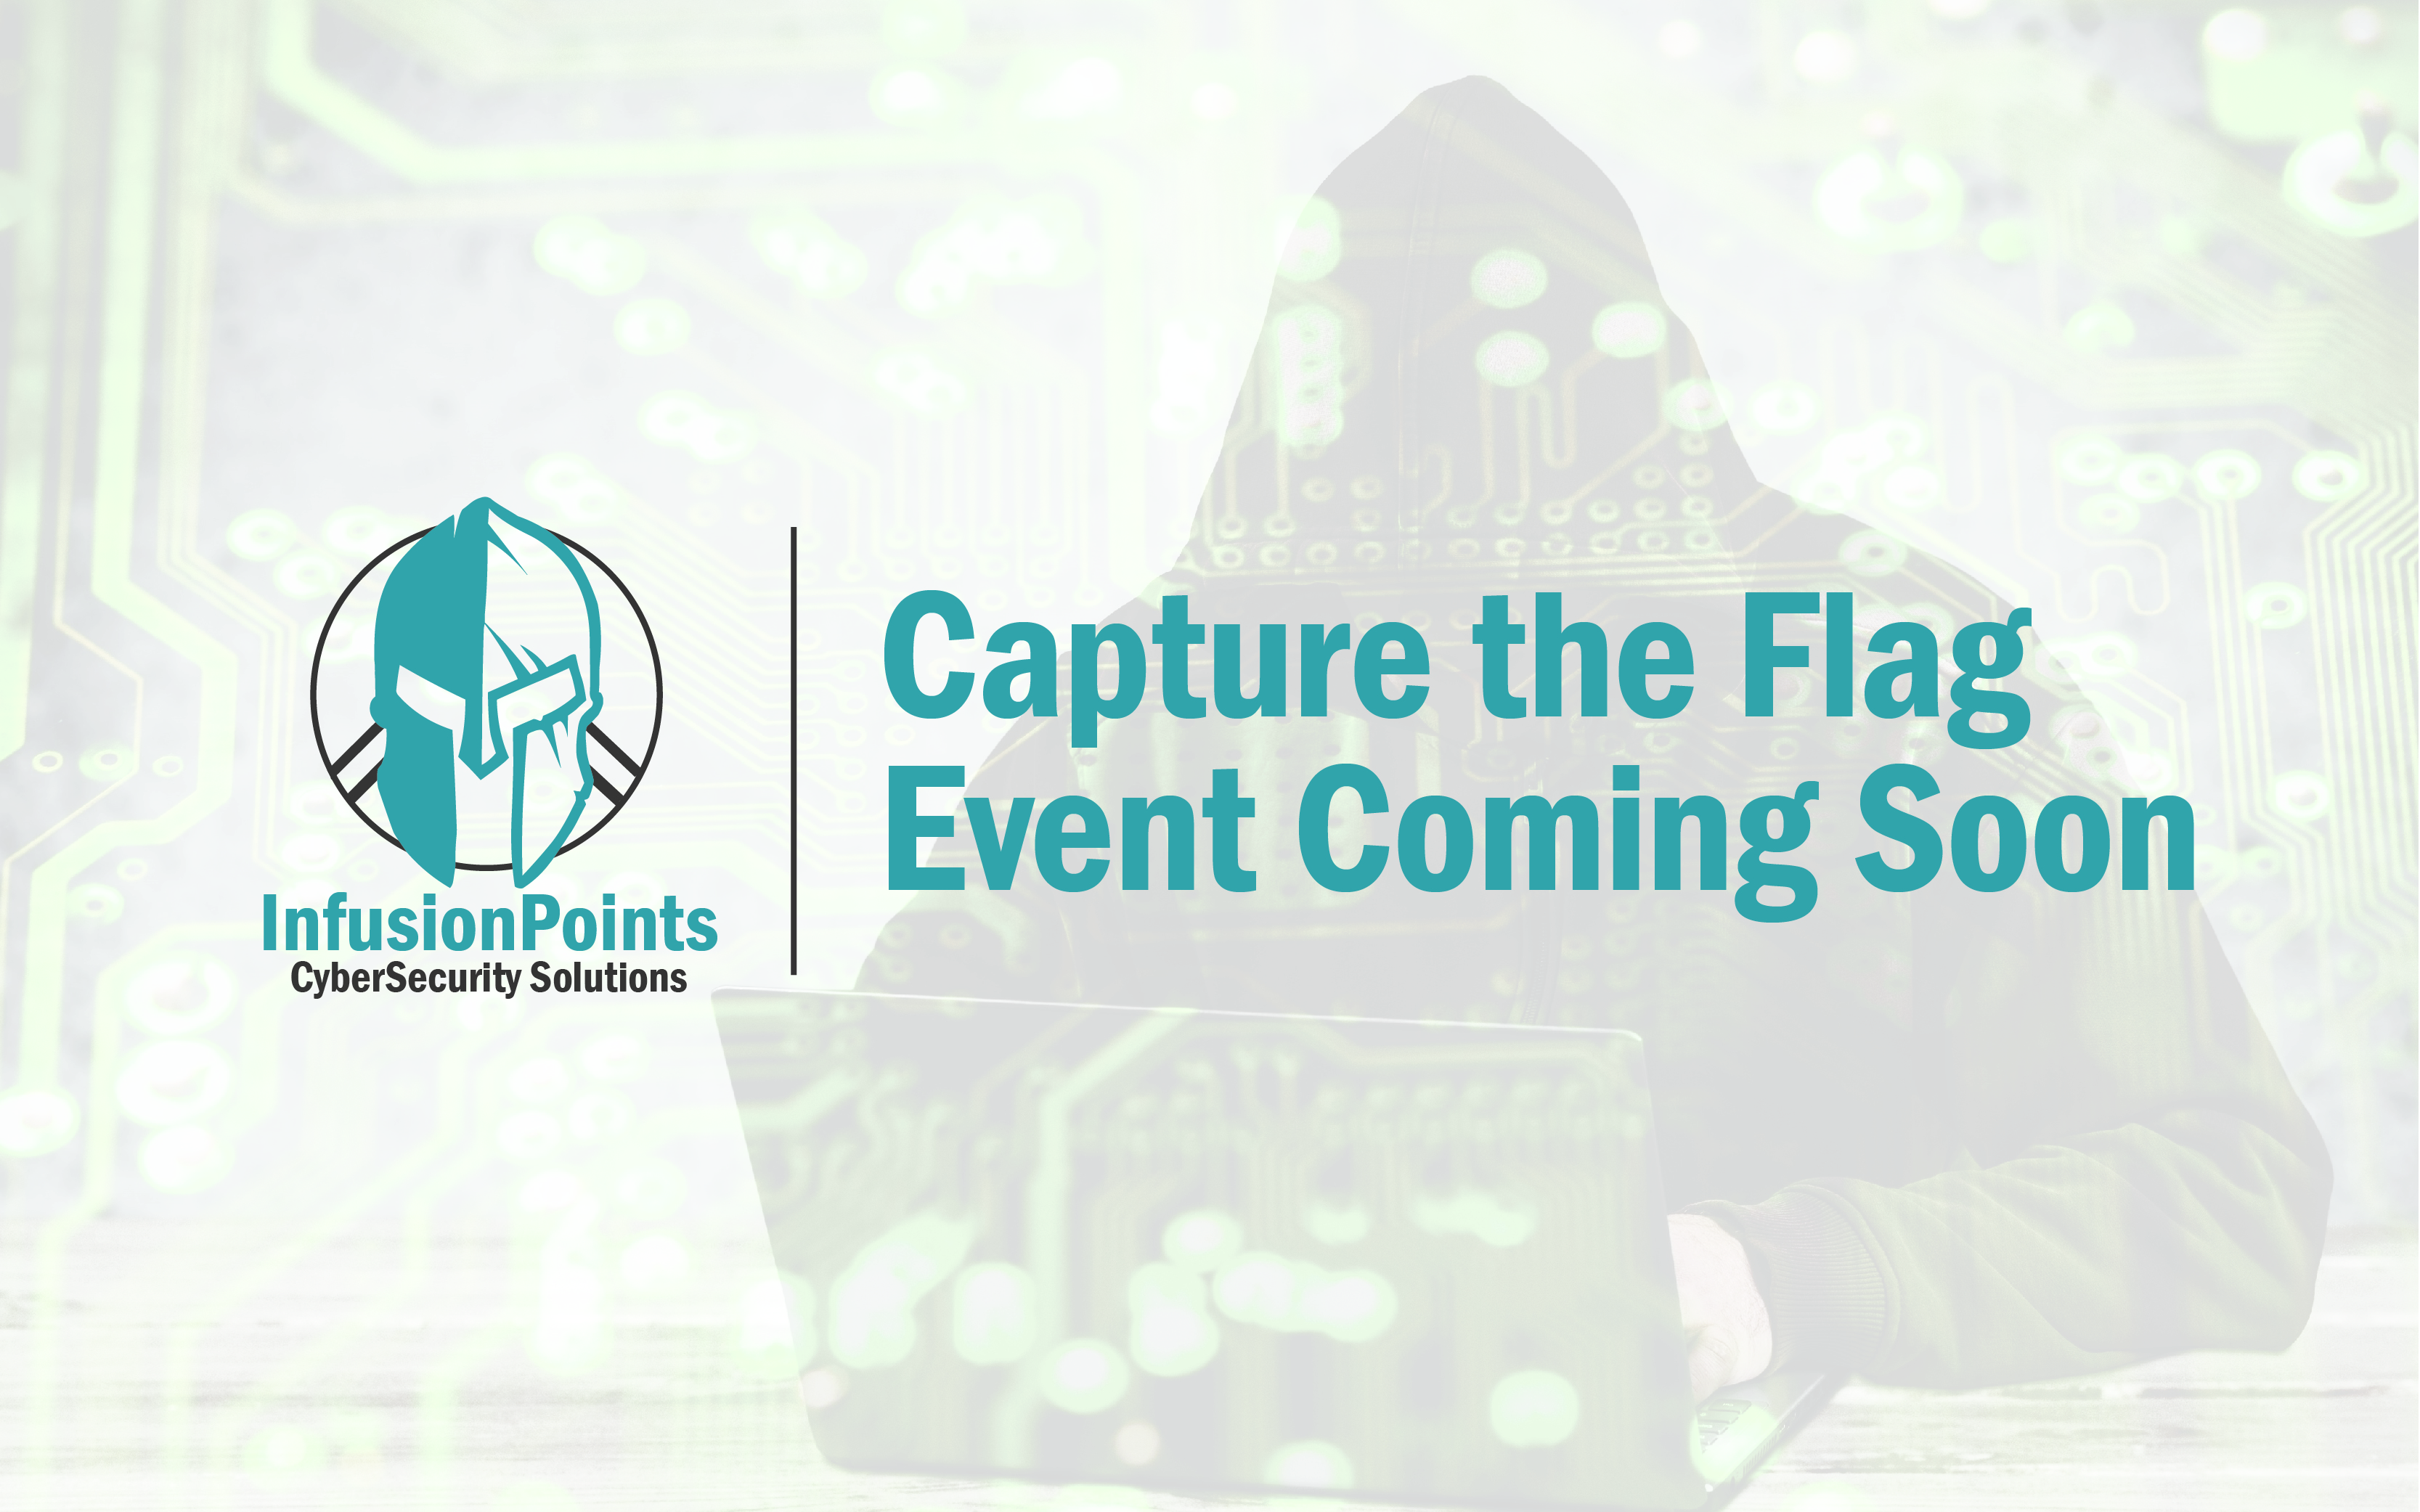 InfusionPoints to conduct the CTF at SecureWV on November 18-19!